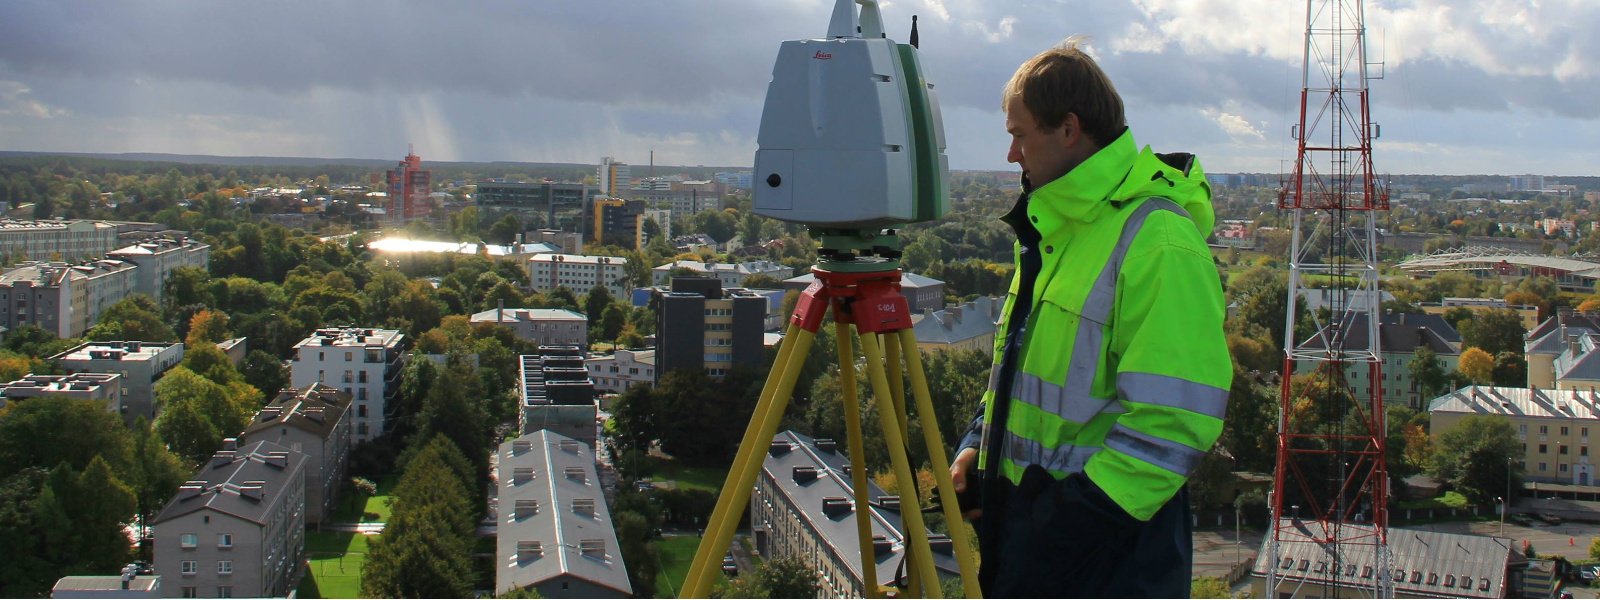 GEO S.T. OÜ - We provide comprehensive geodesy and laser scanning services, ensuring accuracy and quality in every measur...